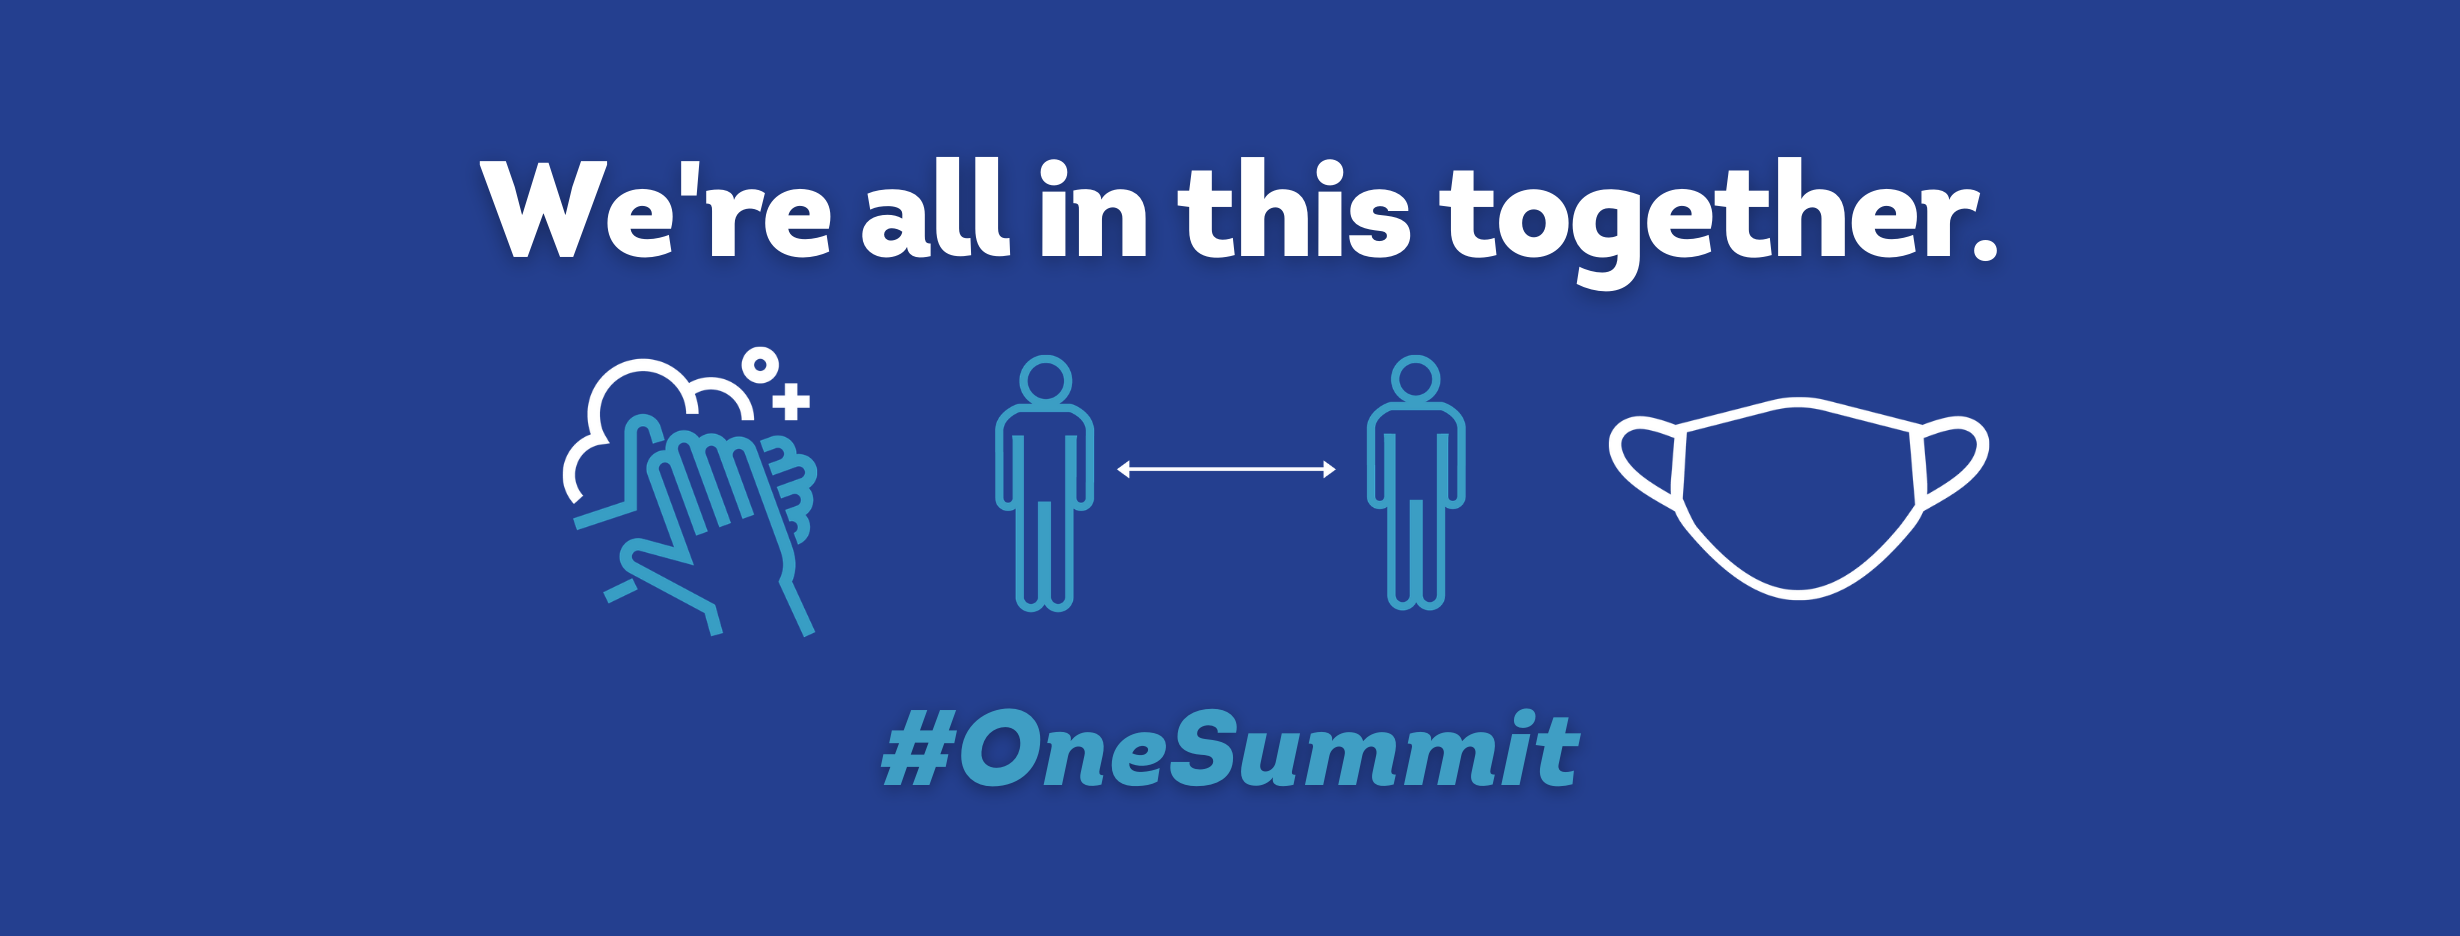 W're all in this together One Summit Banner